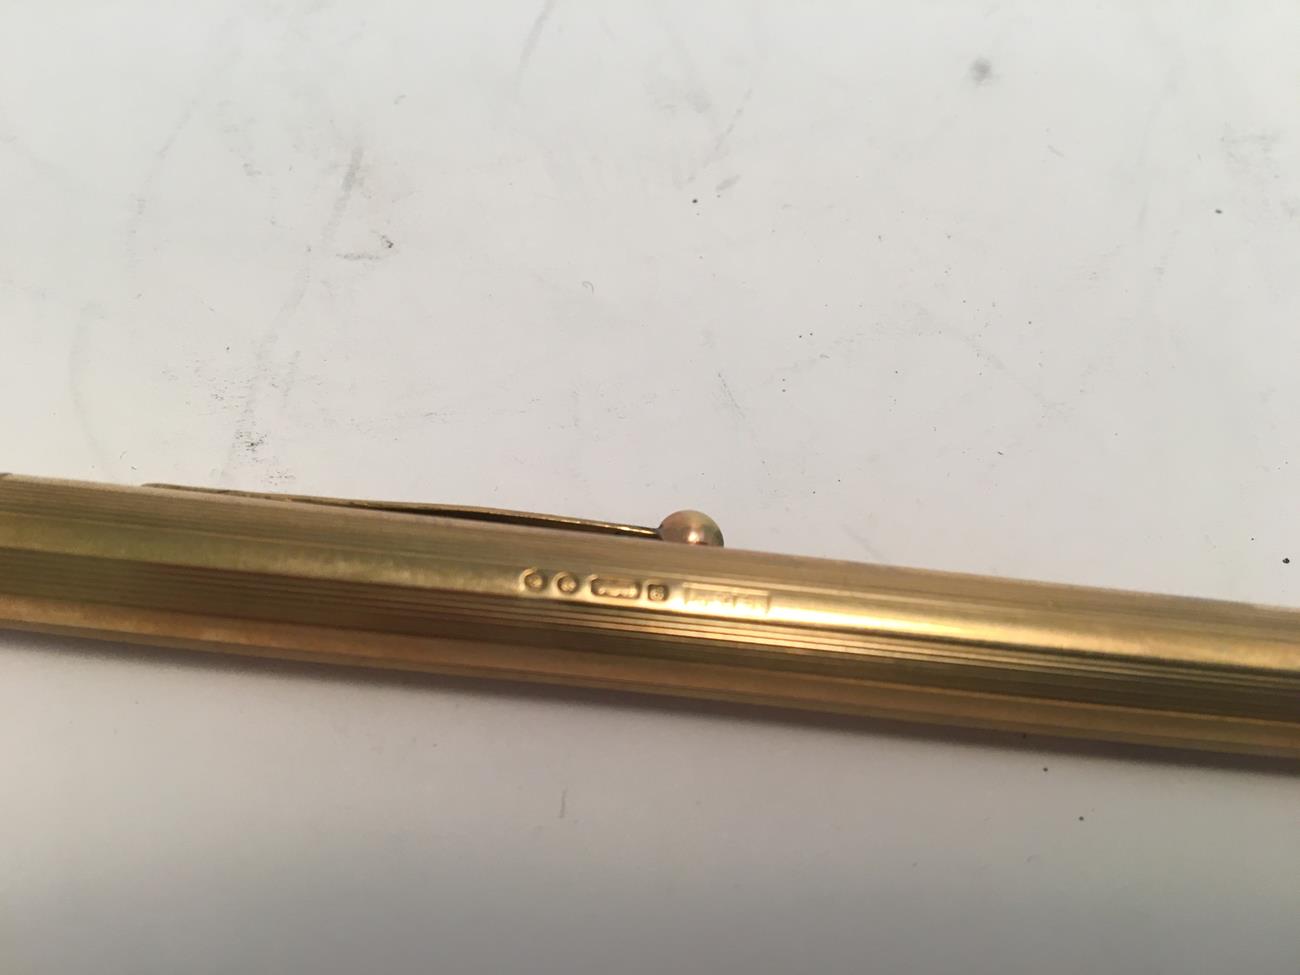 A George V Gold Waterman's Ideal Propelling-Pencil and an Edward VIII Waterman's Ideal Gold - Image 8 of 9